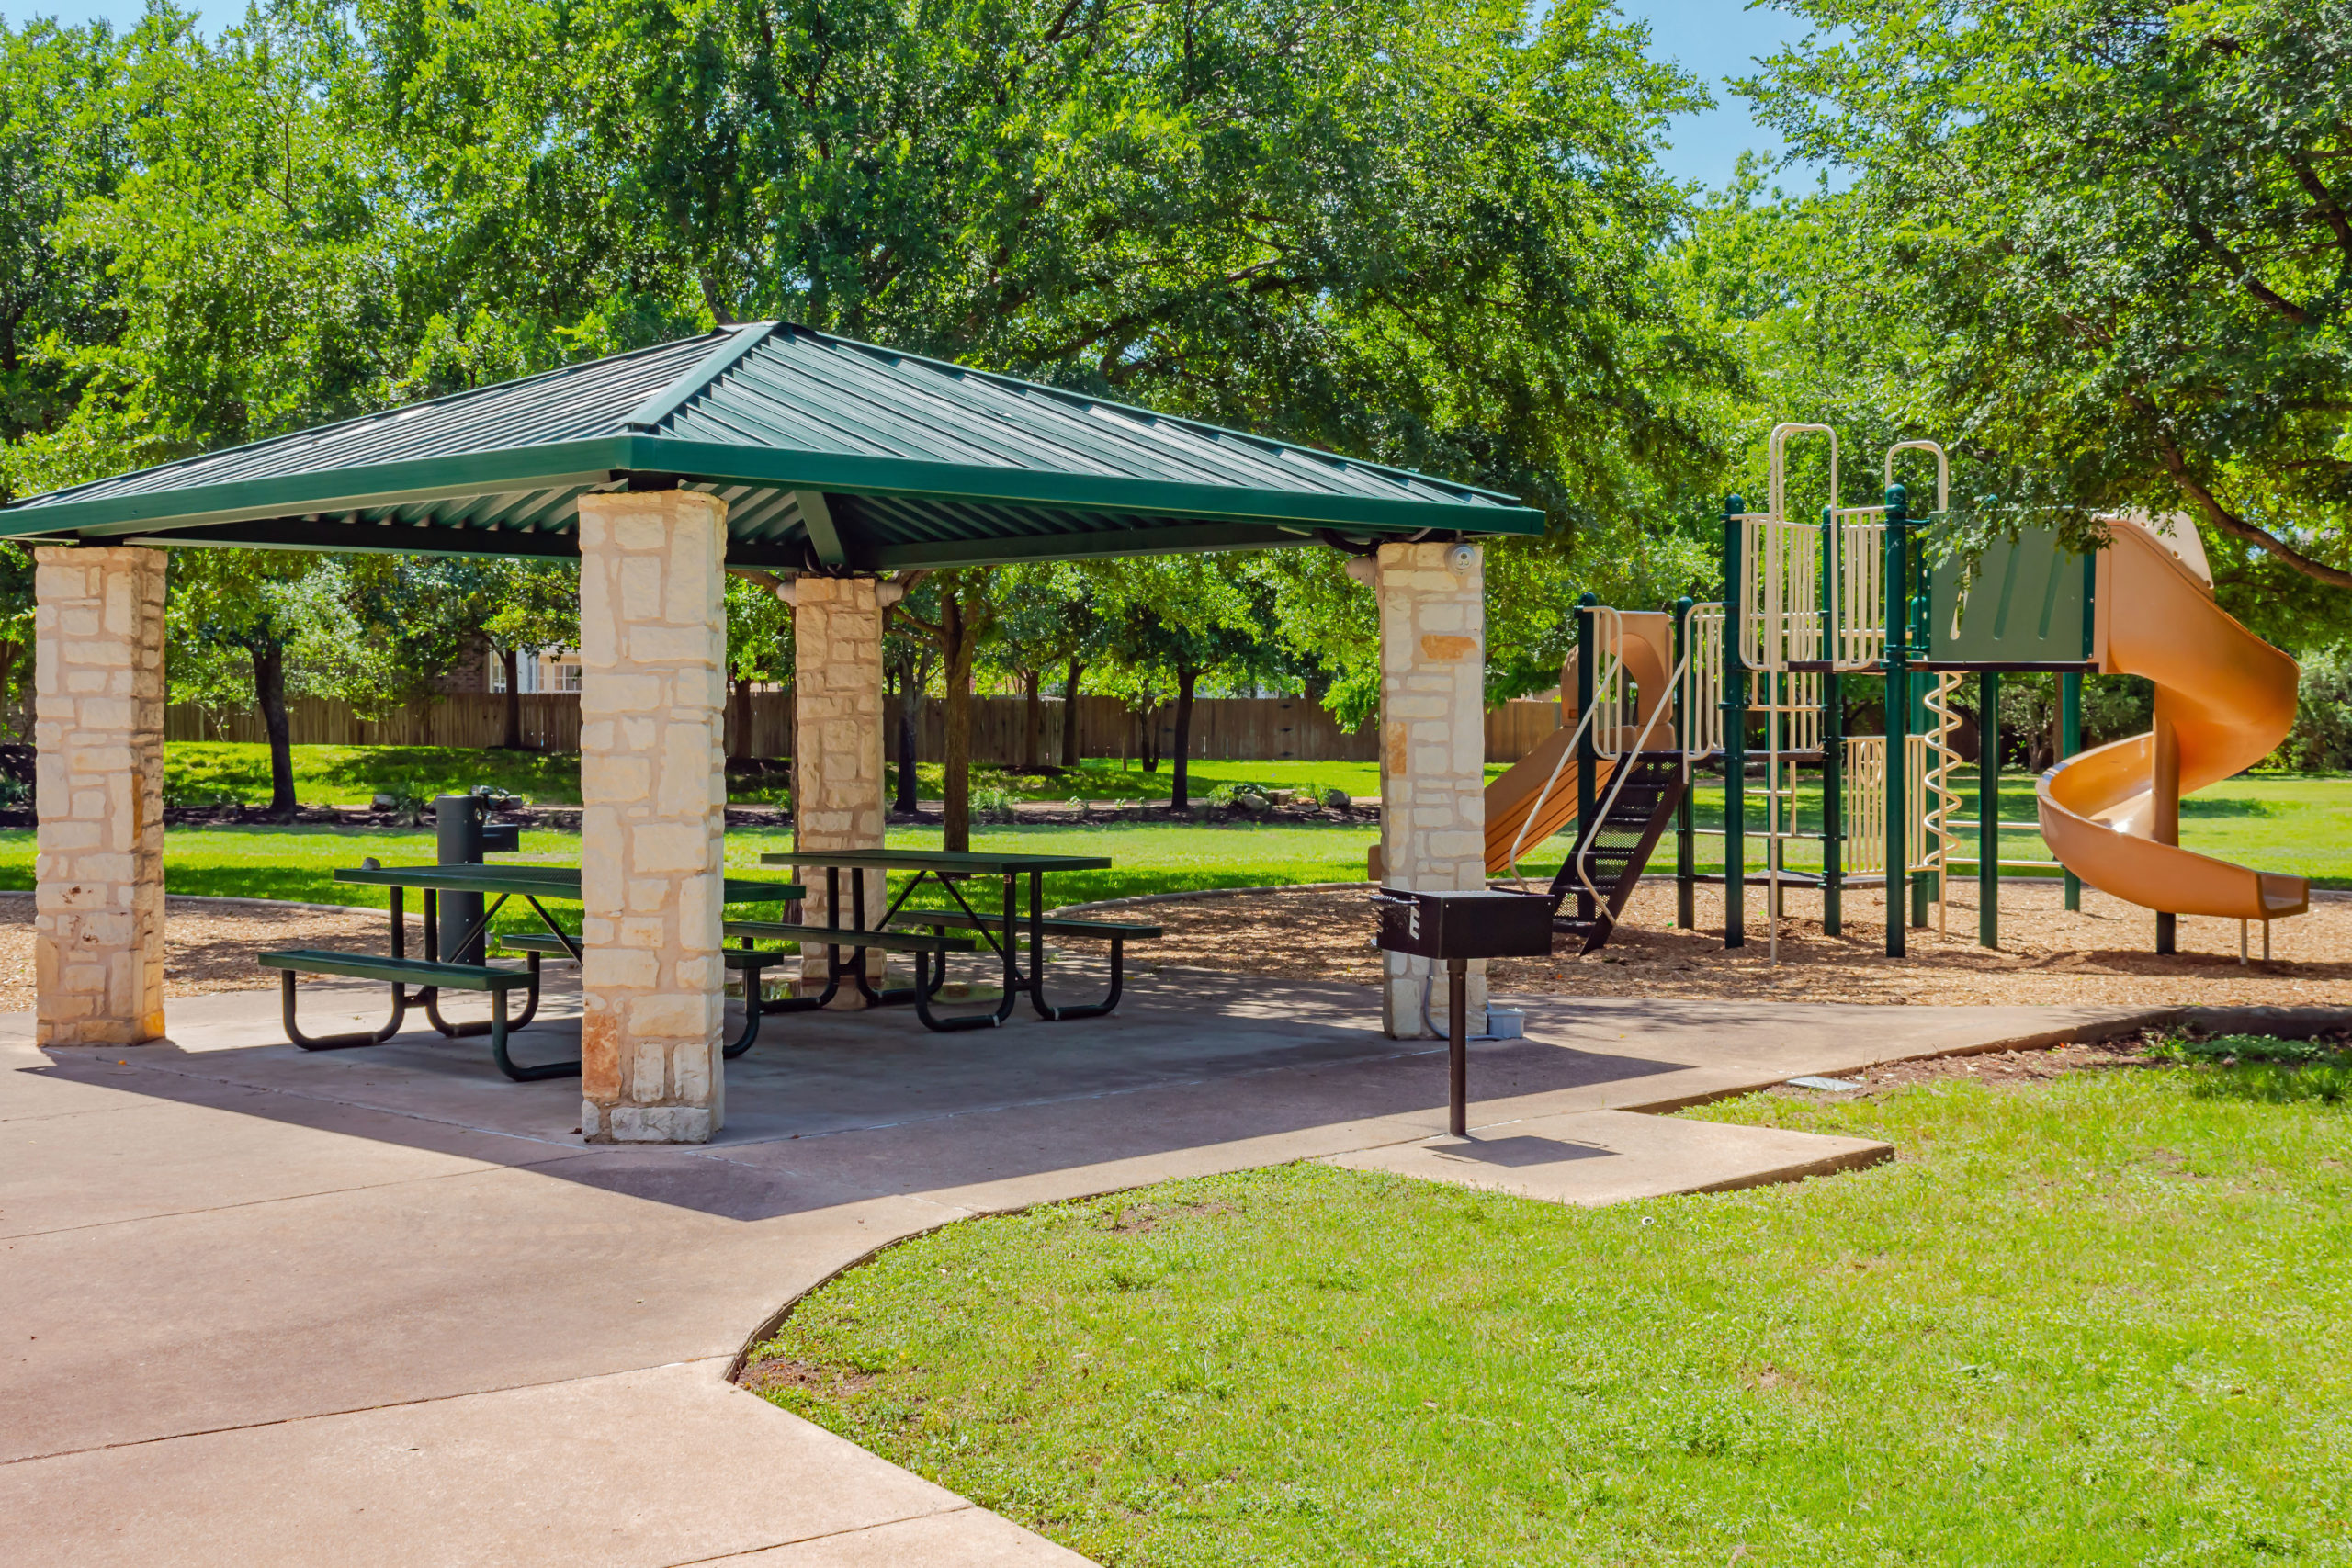 Picture of a playground and covered picnic tables.